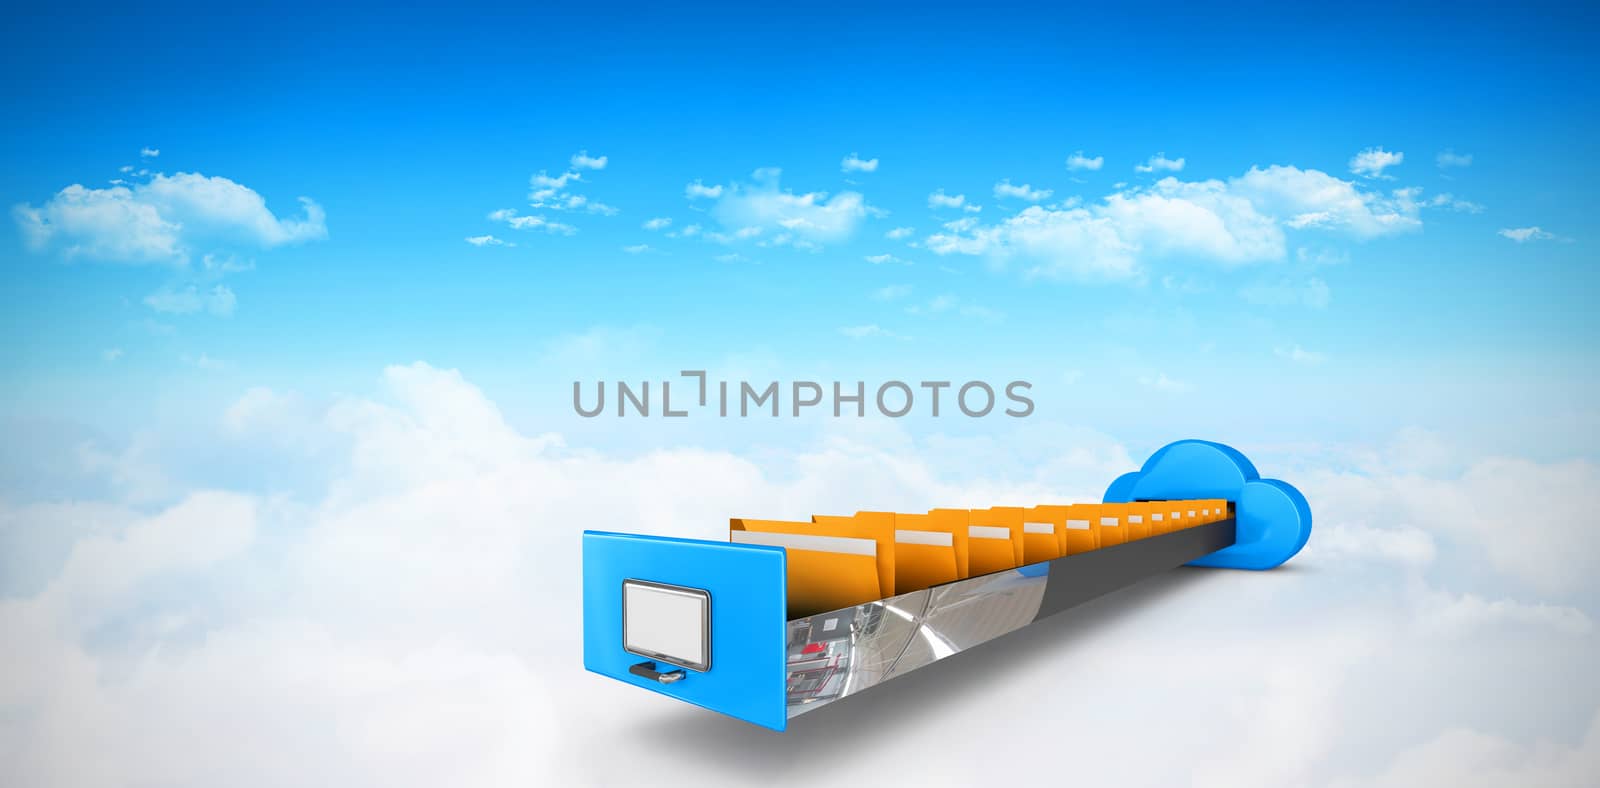 Composite image of cloud computing drawer by Wavebreakmedia